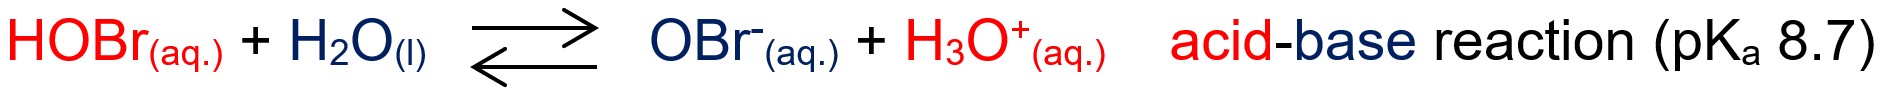 Acid-base reaction of hypobromous acid and water to yield hypobromite anion and hydronium cation